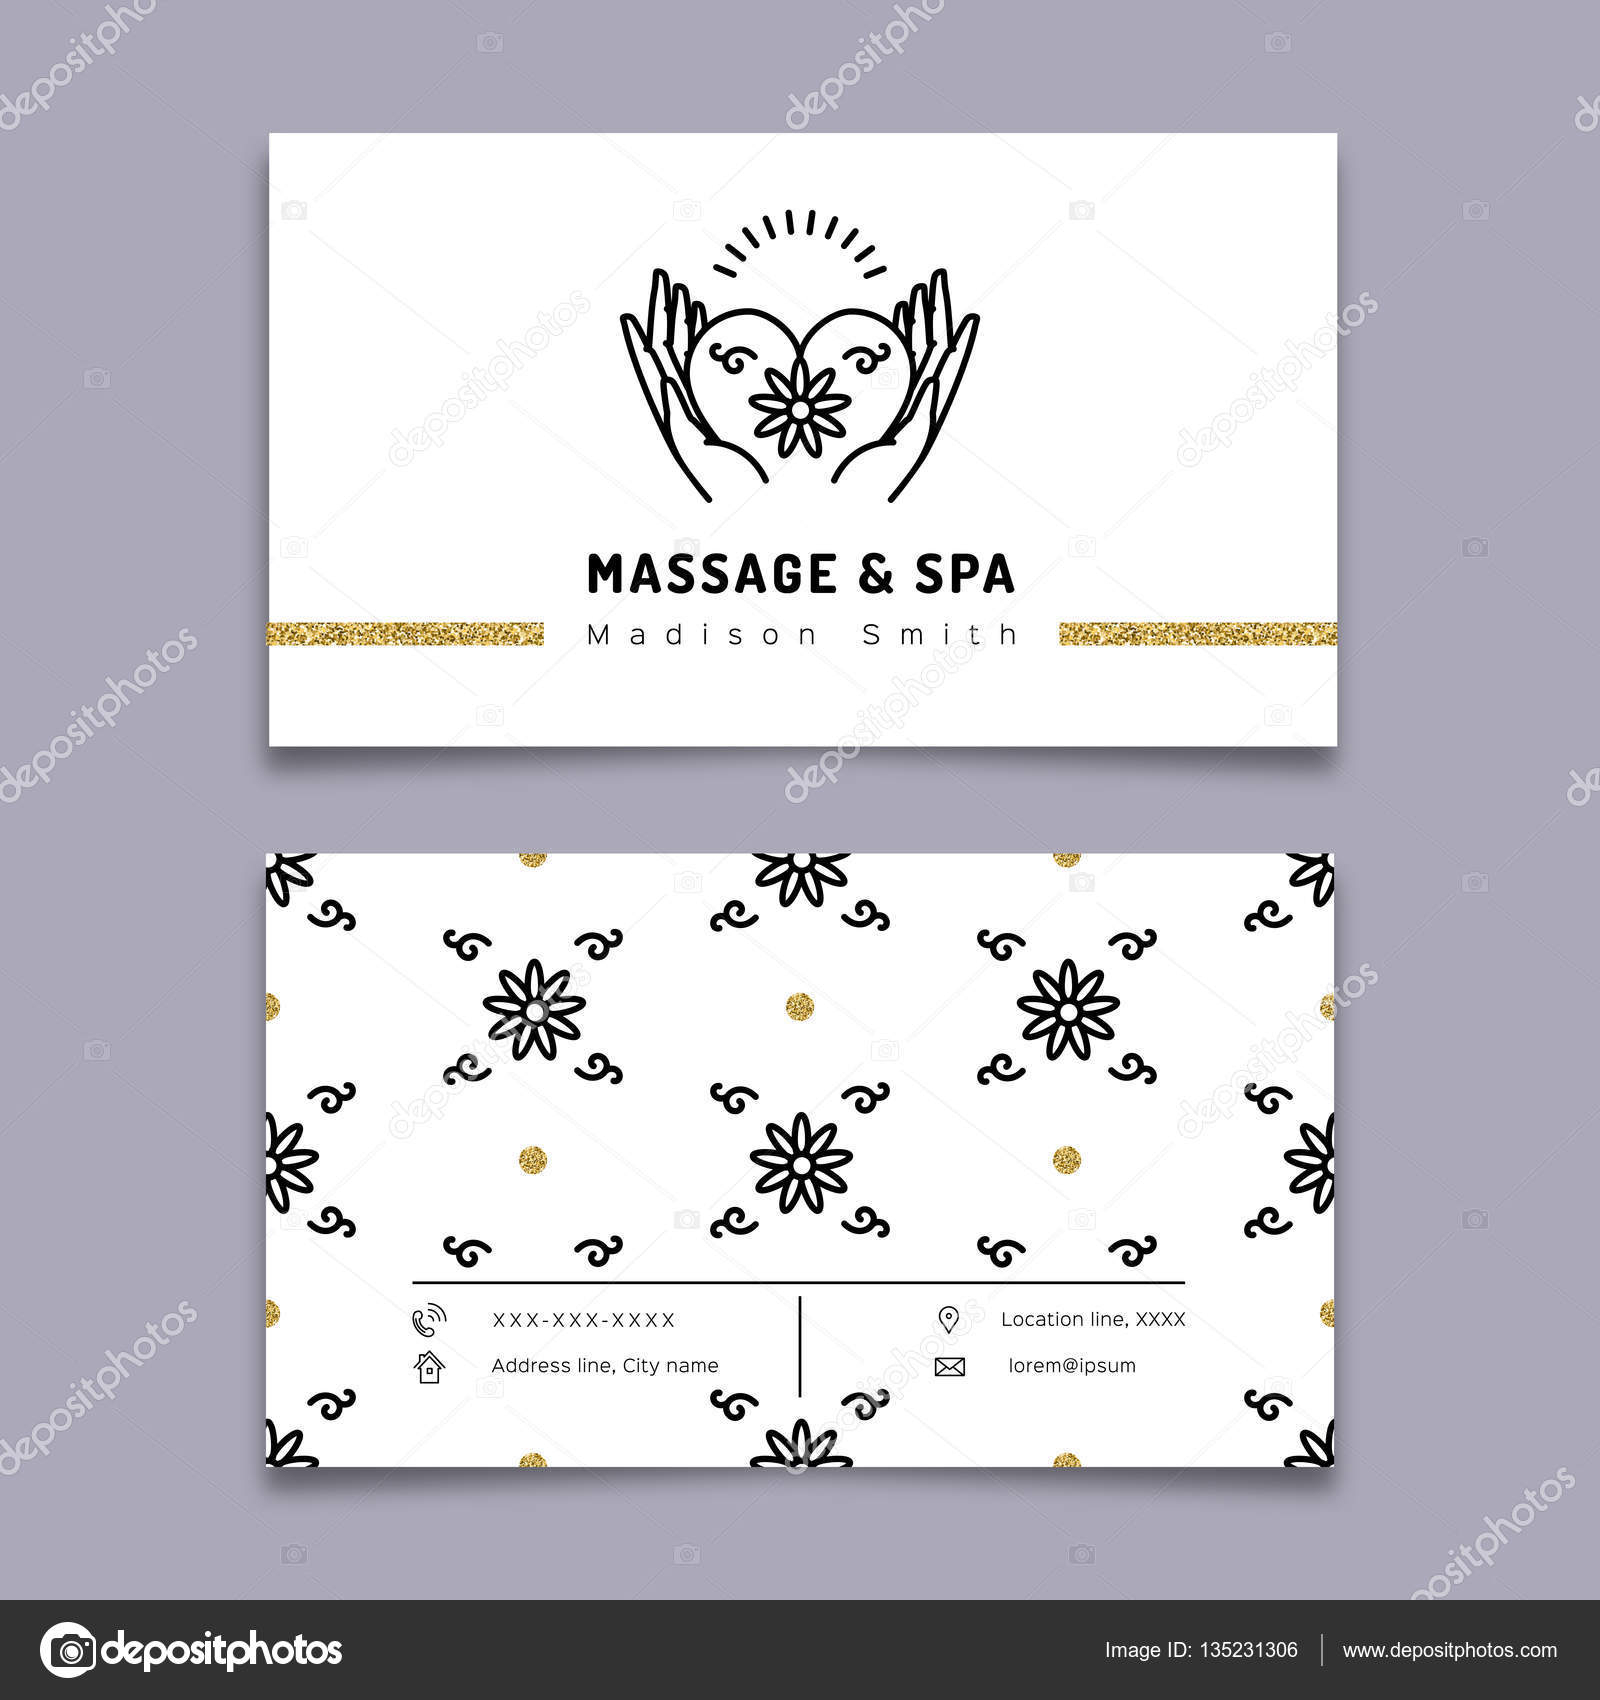 Massage Therapy Business Card Templates | Massage And Spa Pertaining To Massage Therapy Business Card Templates